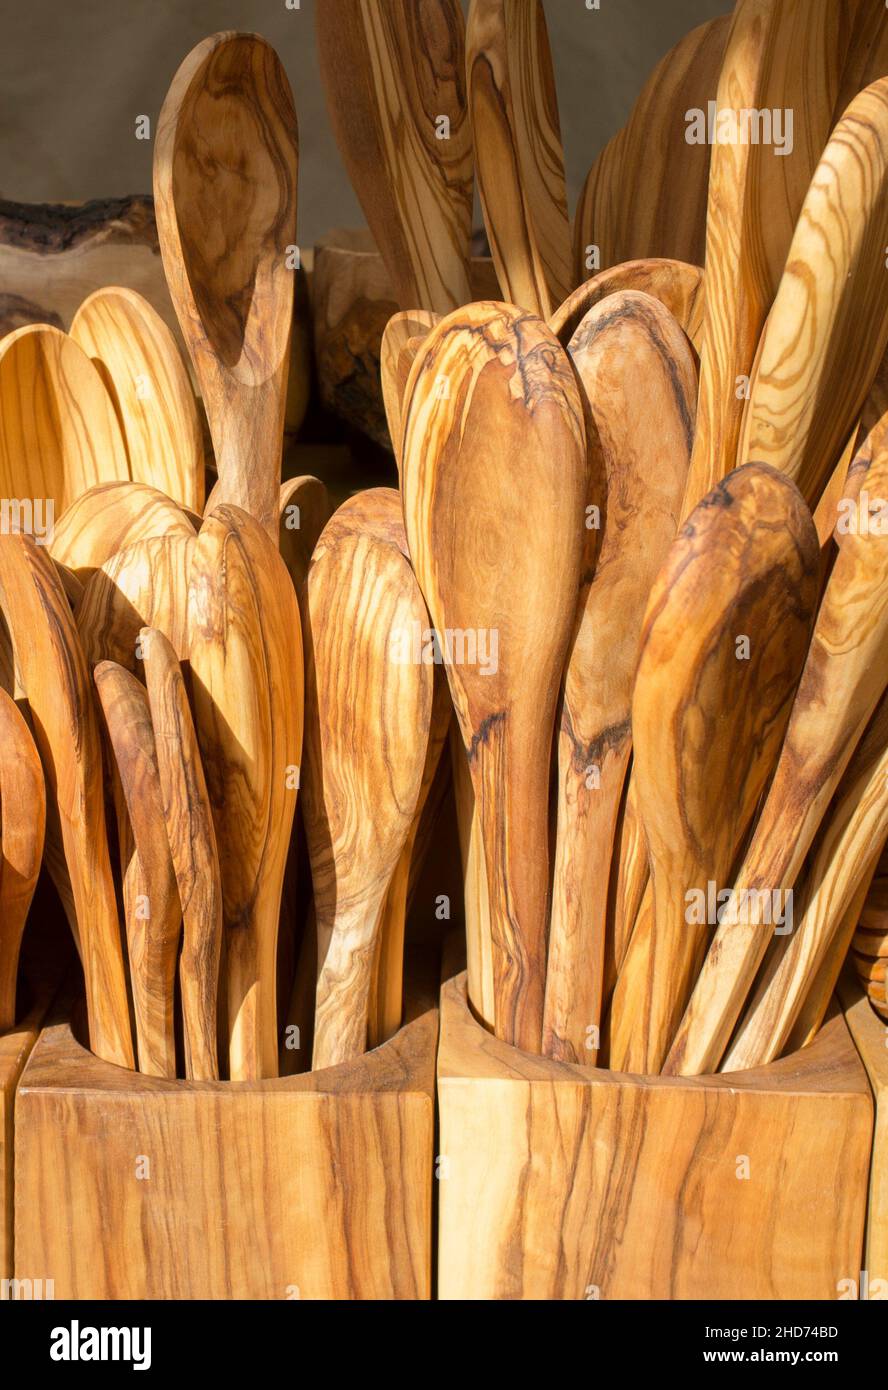 Wooden handcrafted spoons. Closeup. Stock Photo